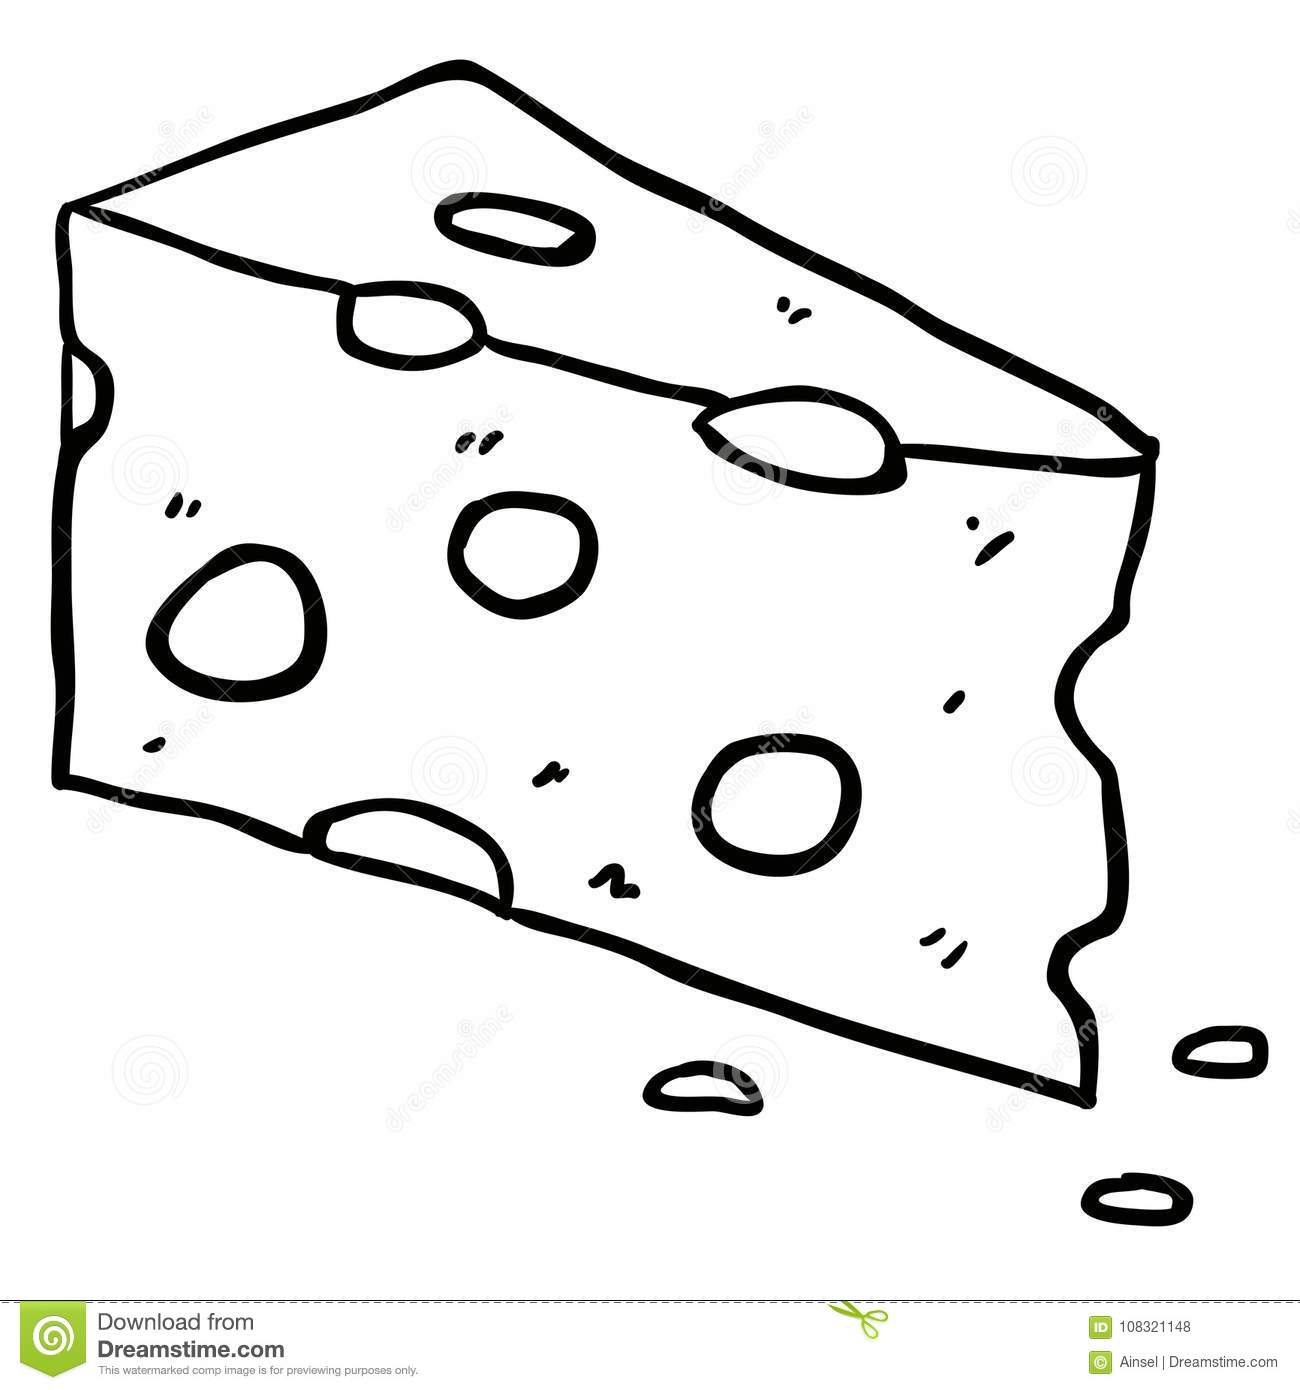 Cheese clipart black and white